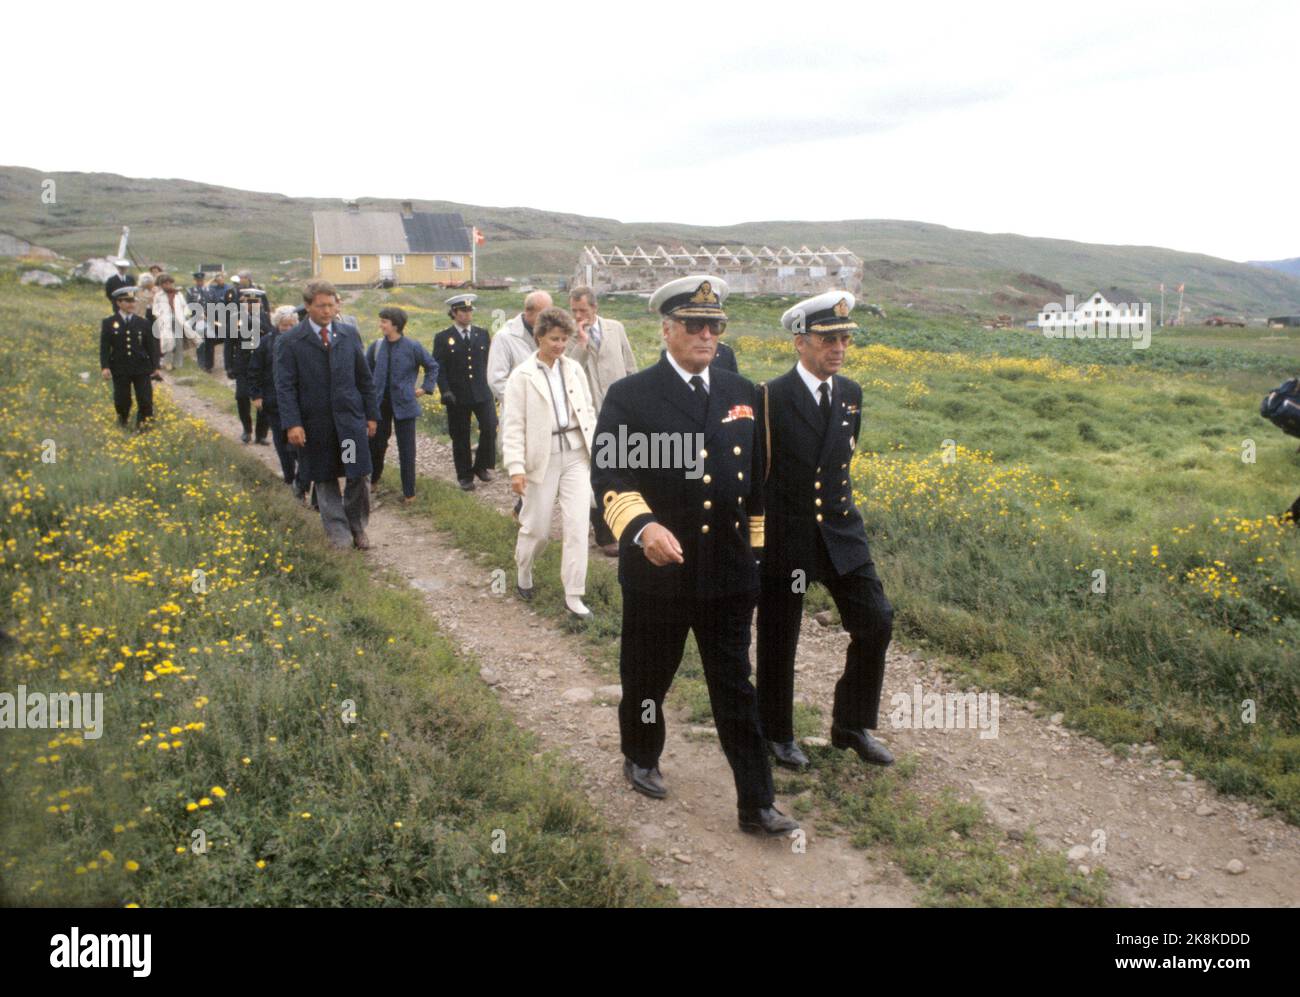 Greenland, Brattalid August 1982. King Olav and Crown Princess Sonja visit Greenland with Queen Margrethe, Prince Henrik, the children Crown Prince Frederik, Prince Joachim of Denmark and President Vigdis Finnbogadottir. Here under a tour of Brattalid. Front (t.v.) King Olav (behind) Crown Princess Sonja. Photo: Paul Owesen NTB / NTB Stock Photo